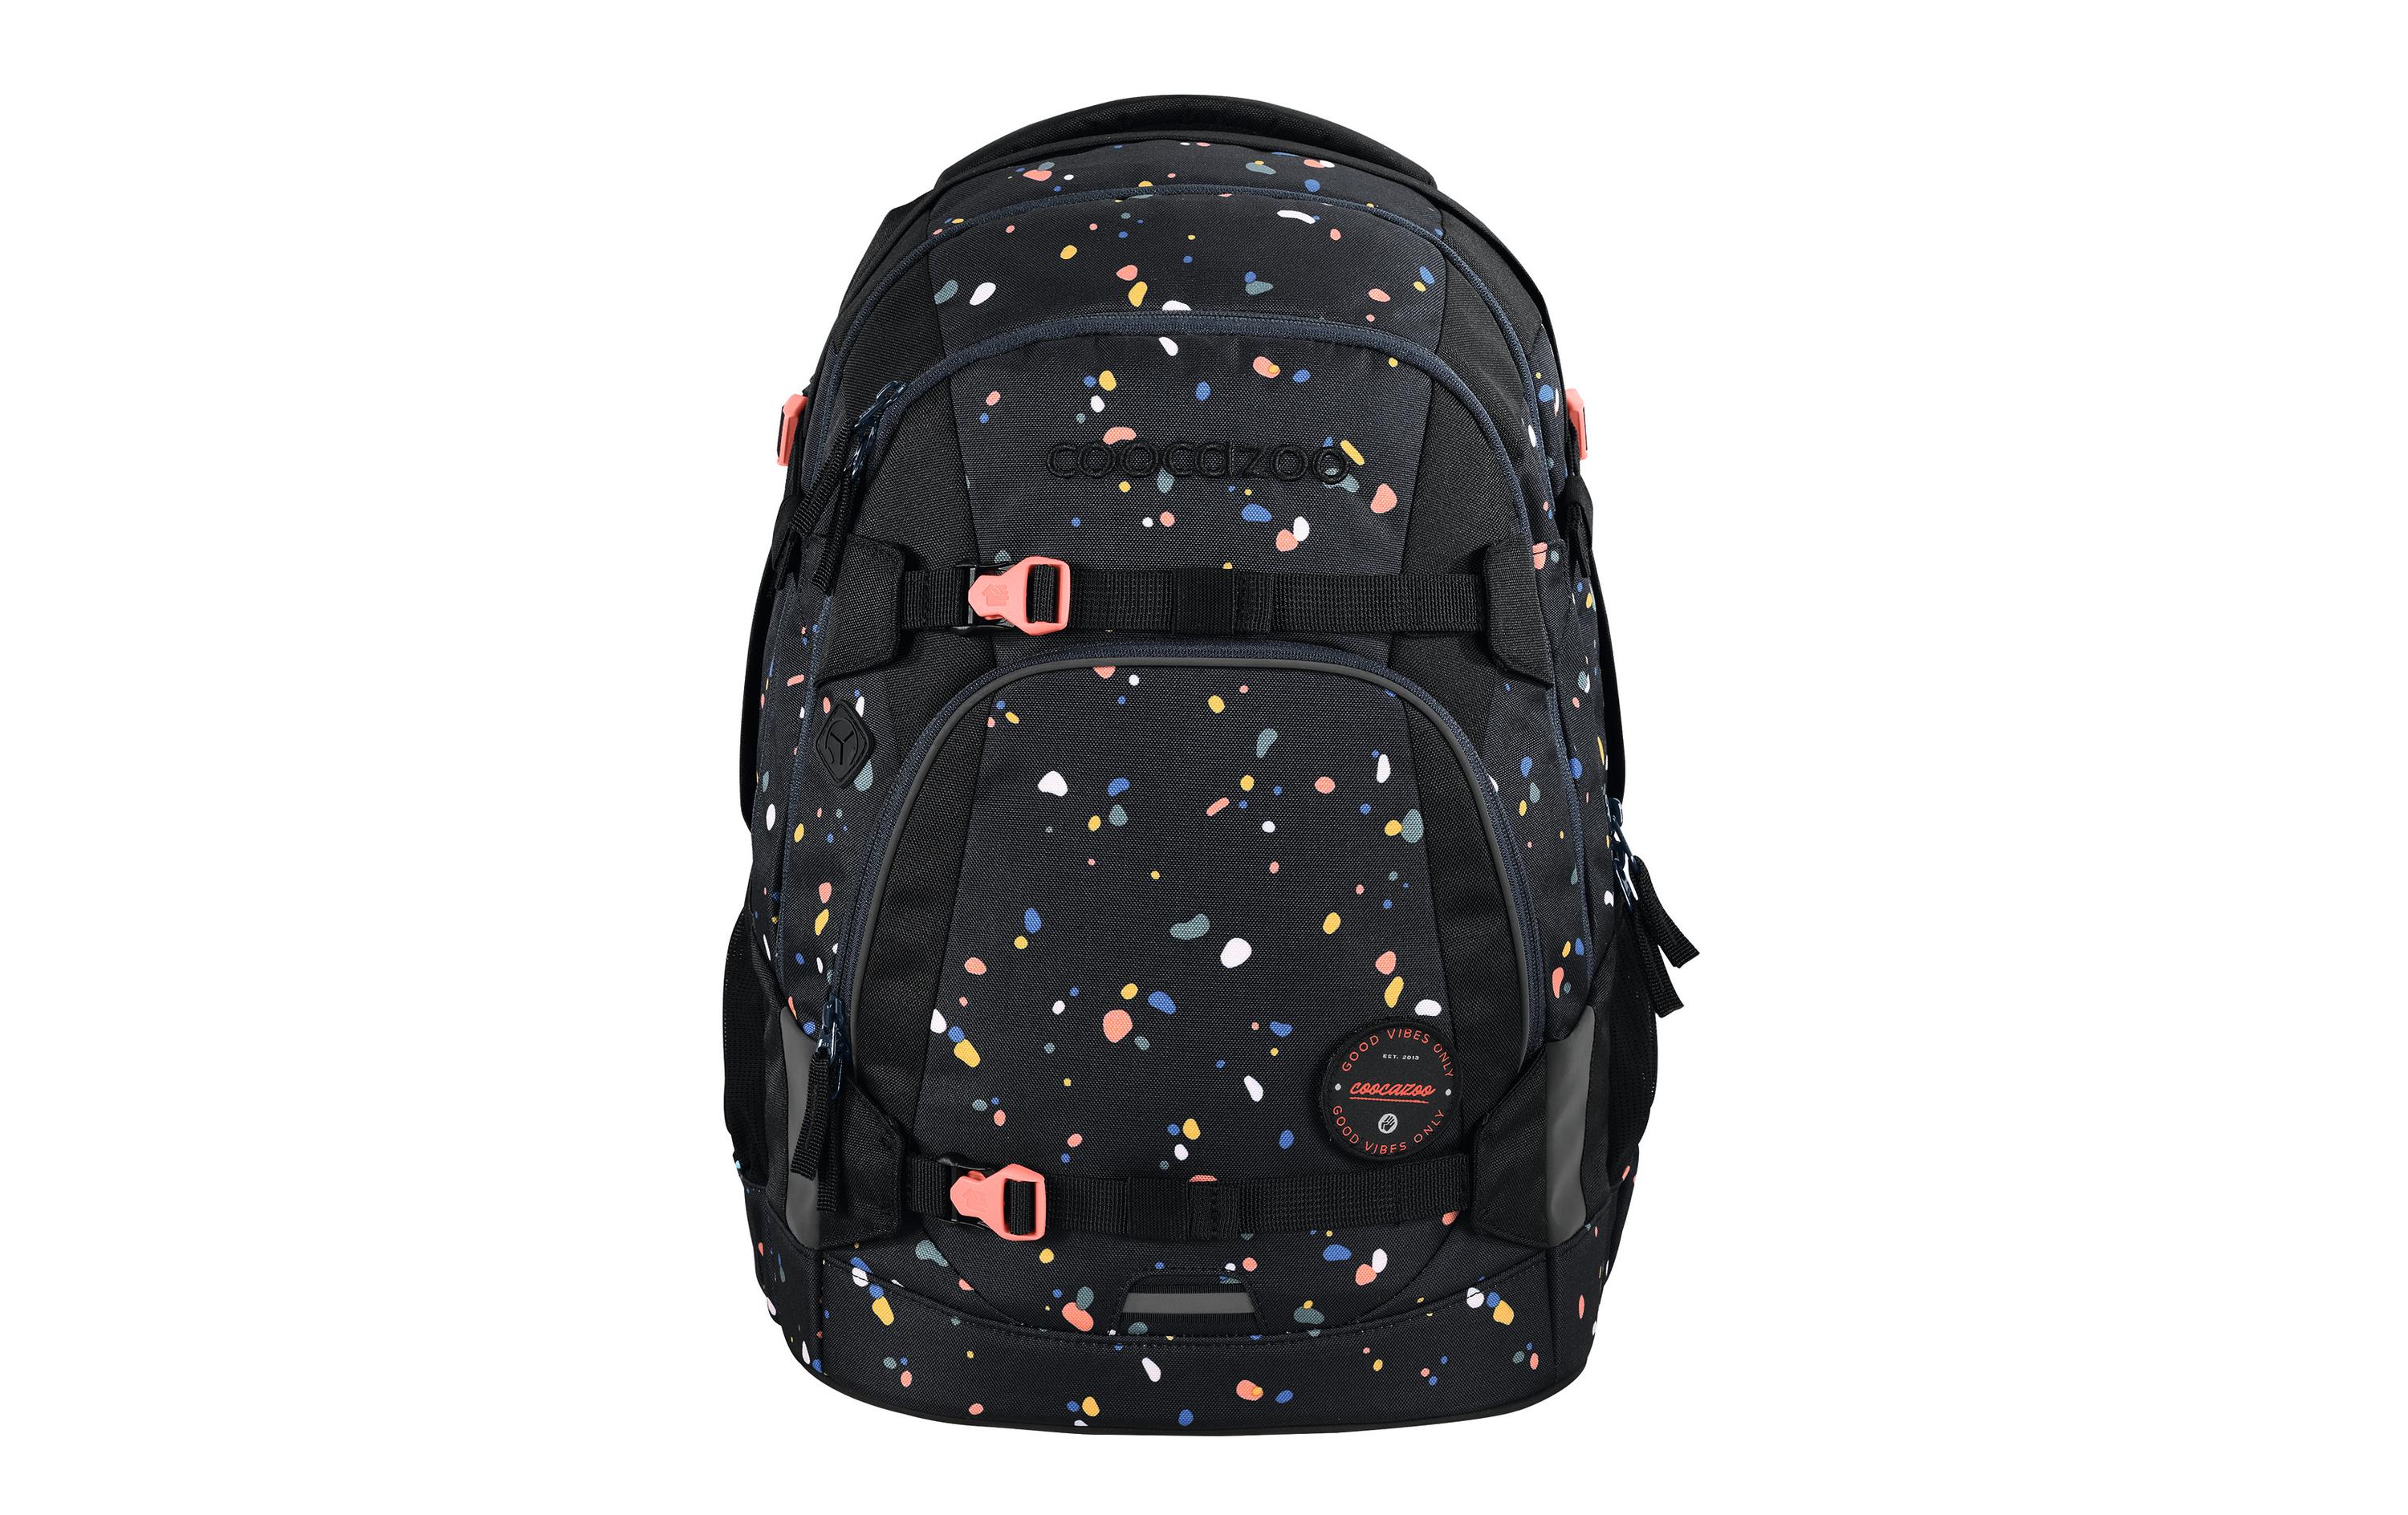 Coocazoo Schulrucksack MATE Sprinkled Candy